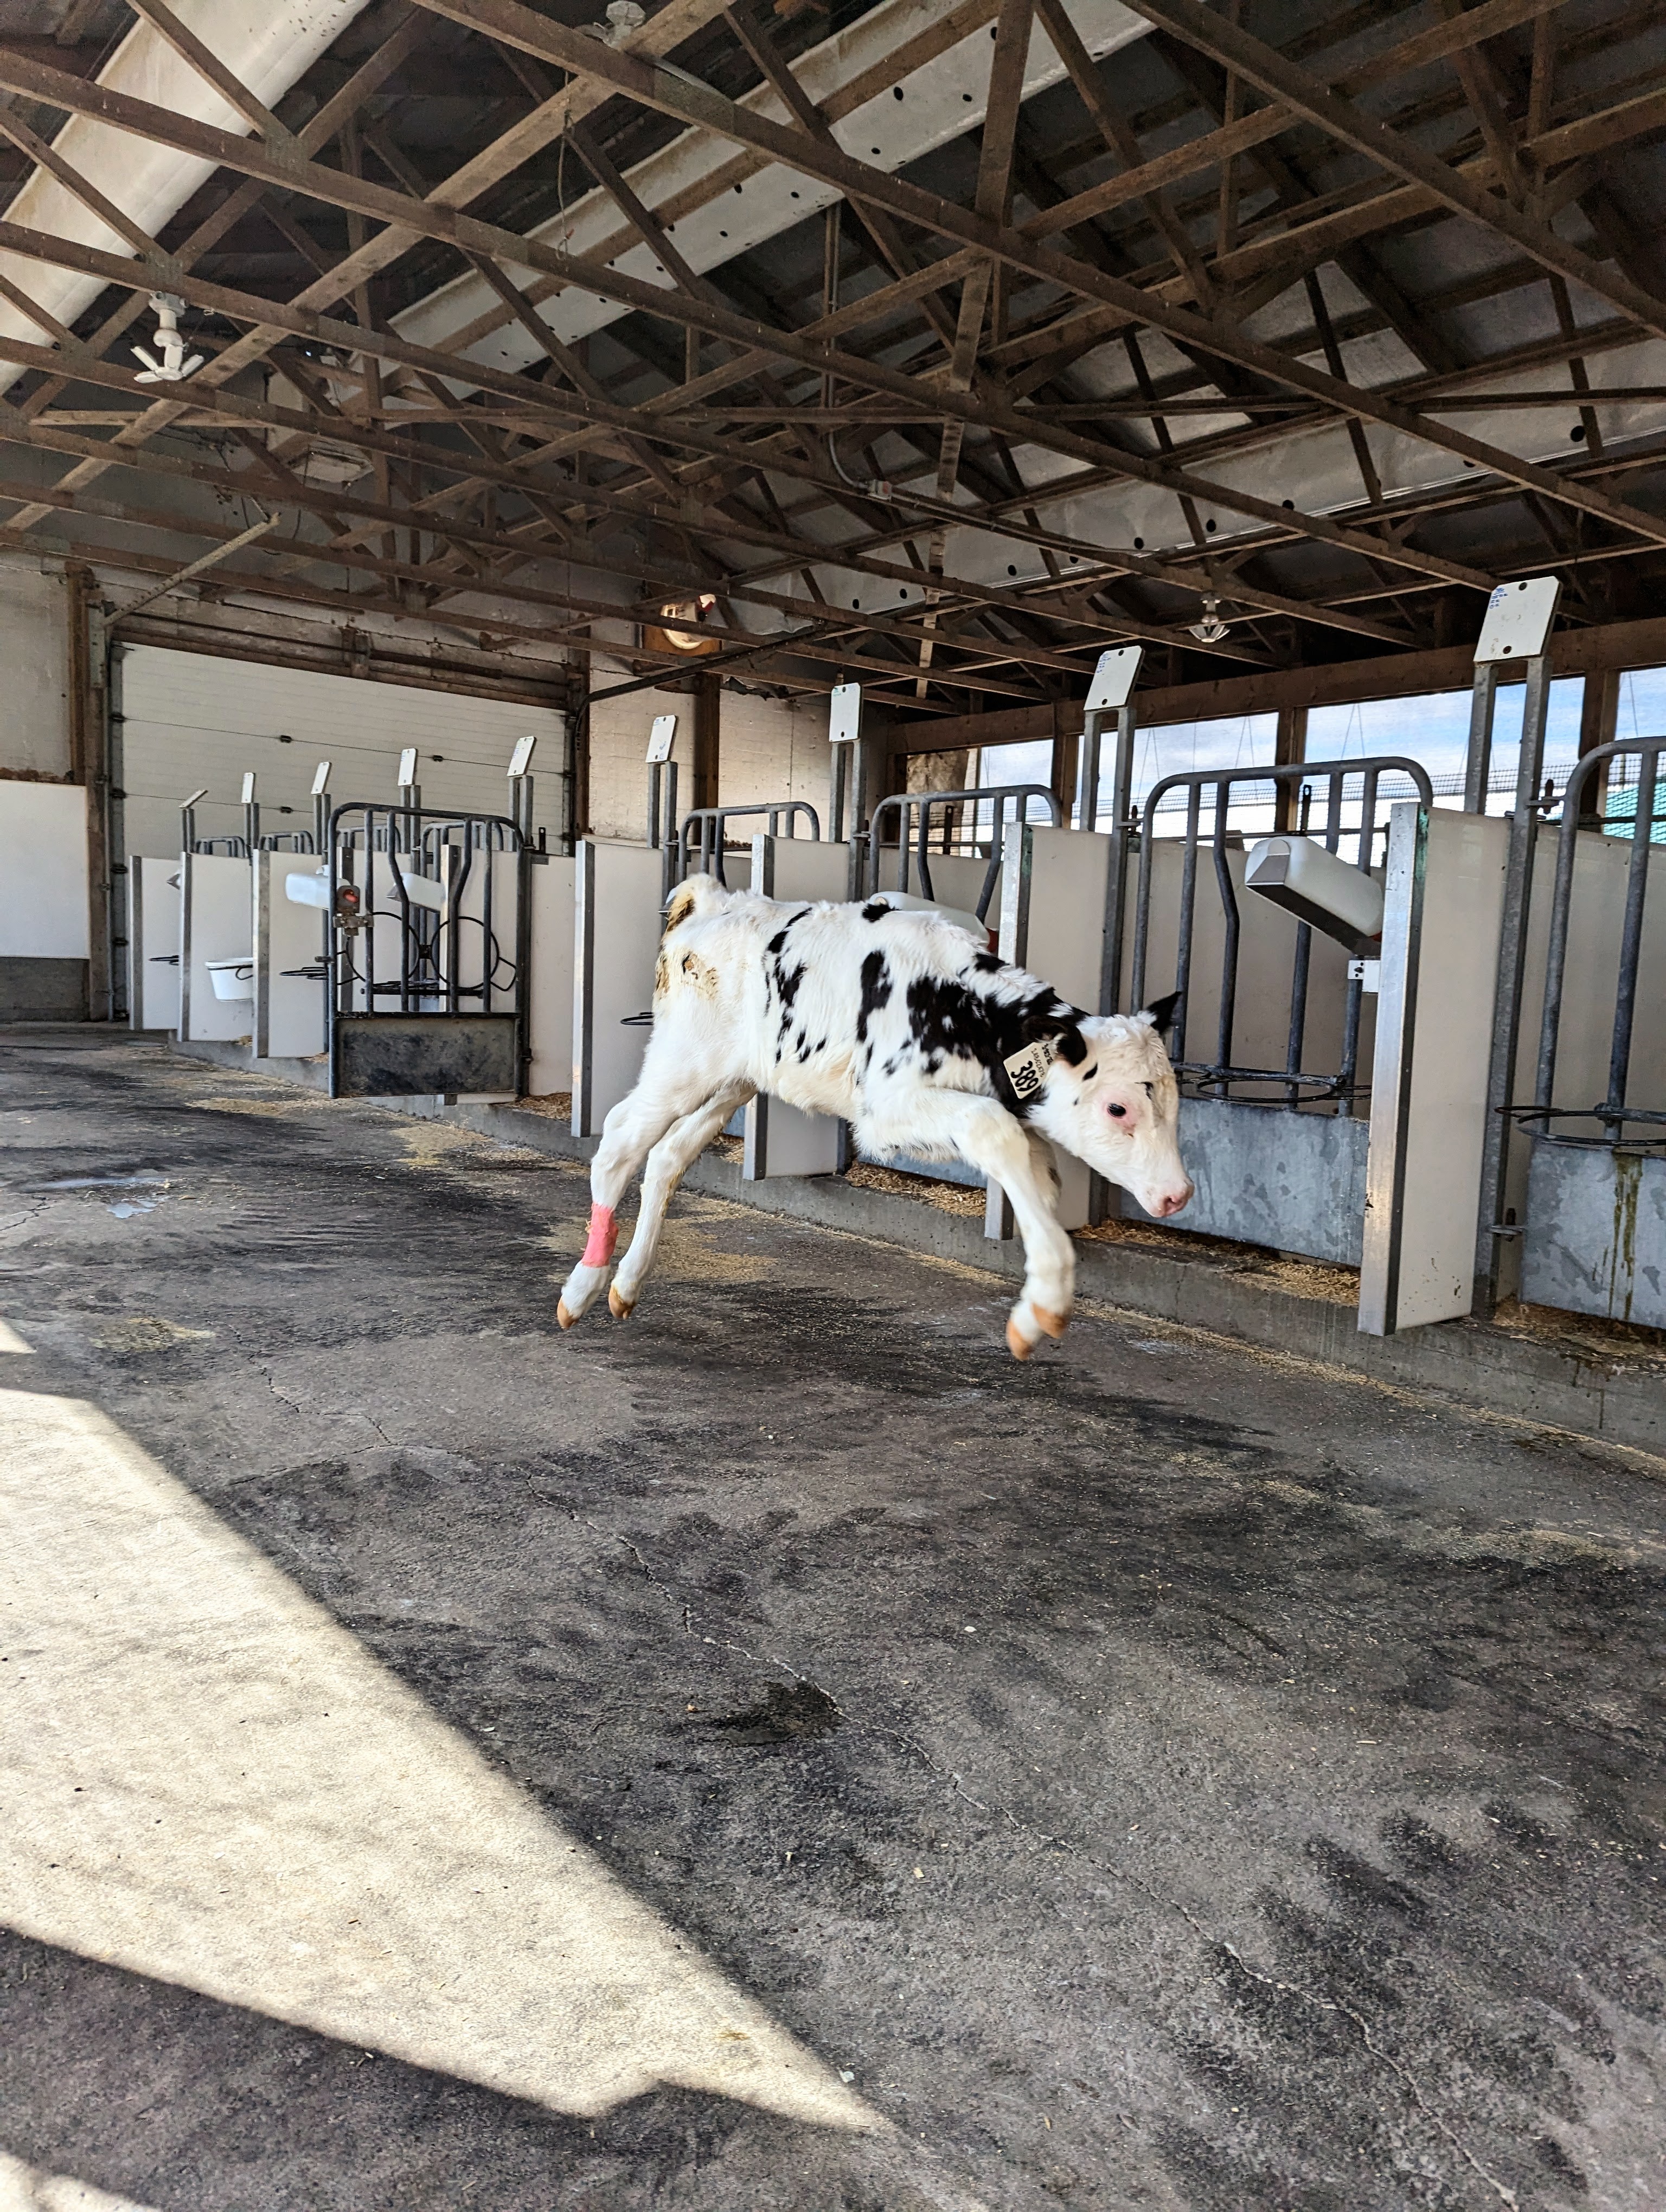 A black and white calf jumping in front of stalls inside a dairy research facility.